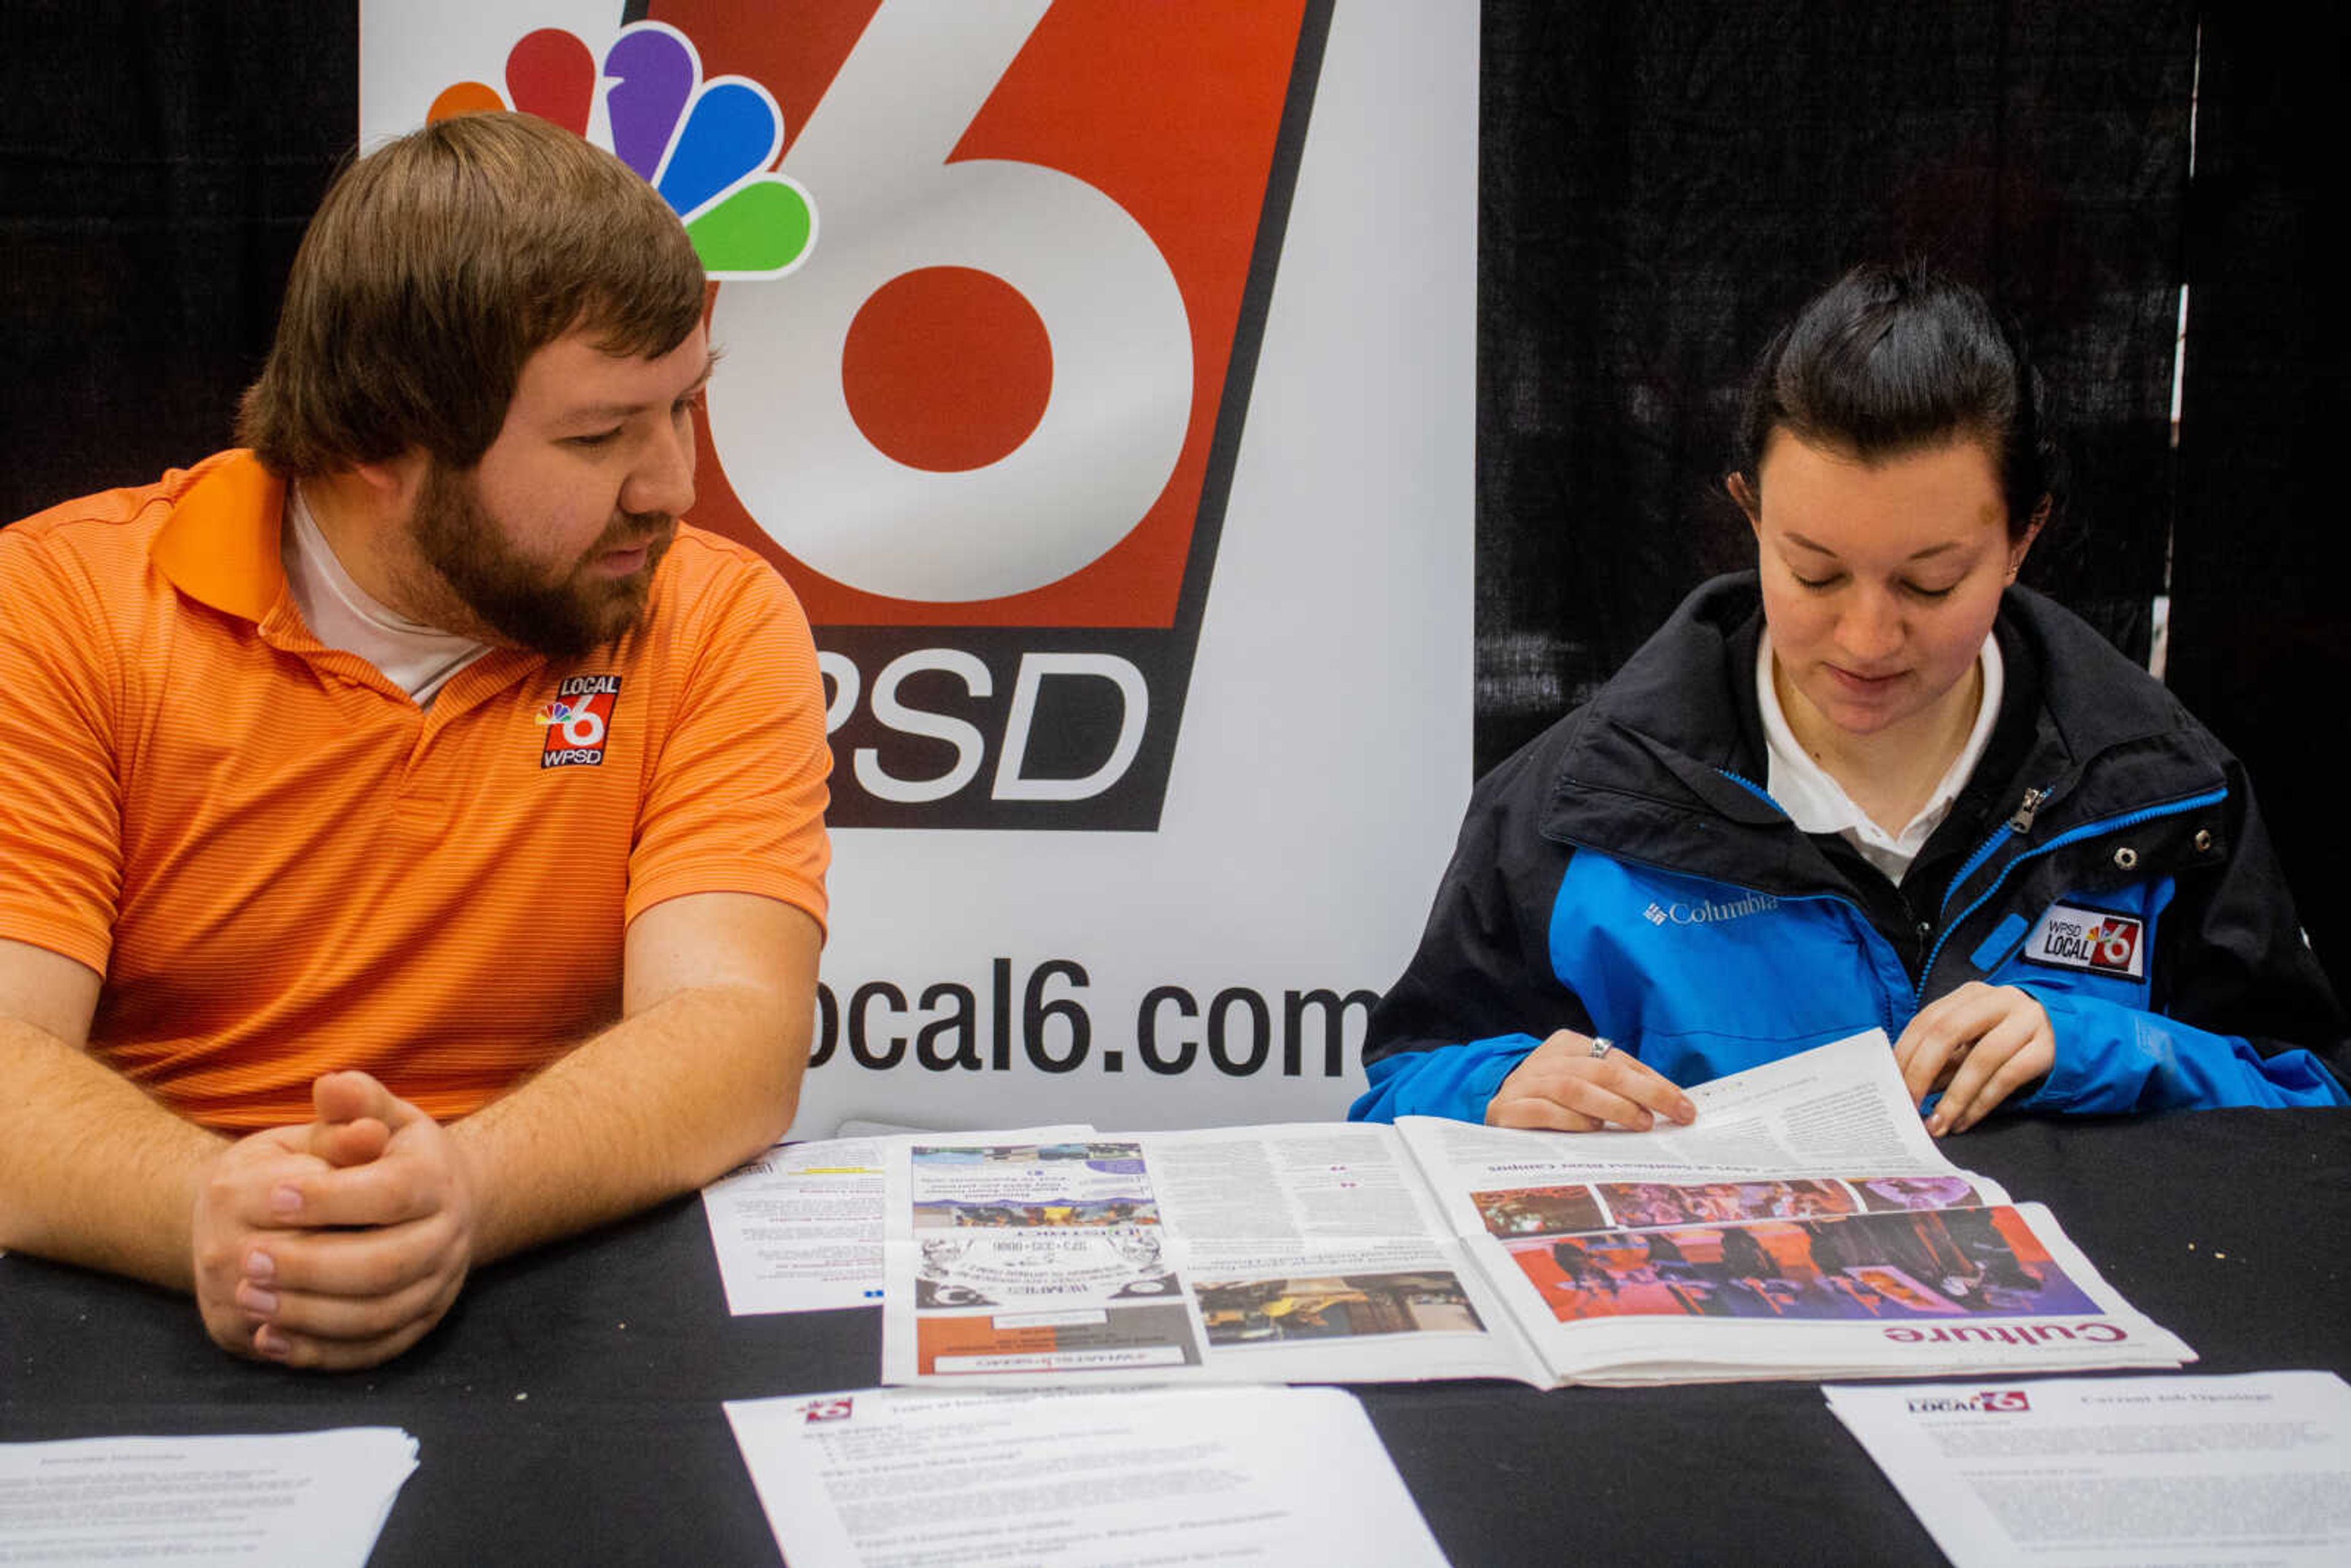 Southeast brings employment opportunities to students at Spring Career Expo